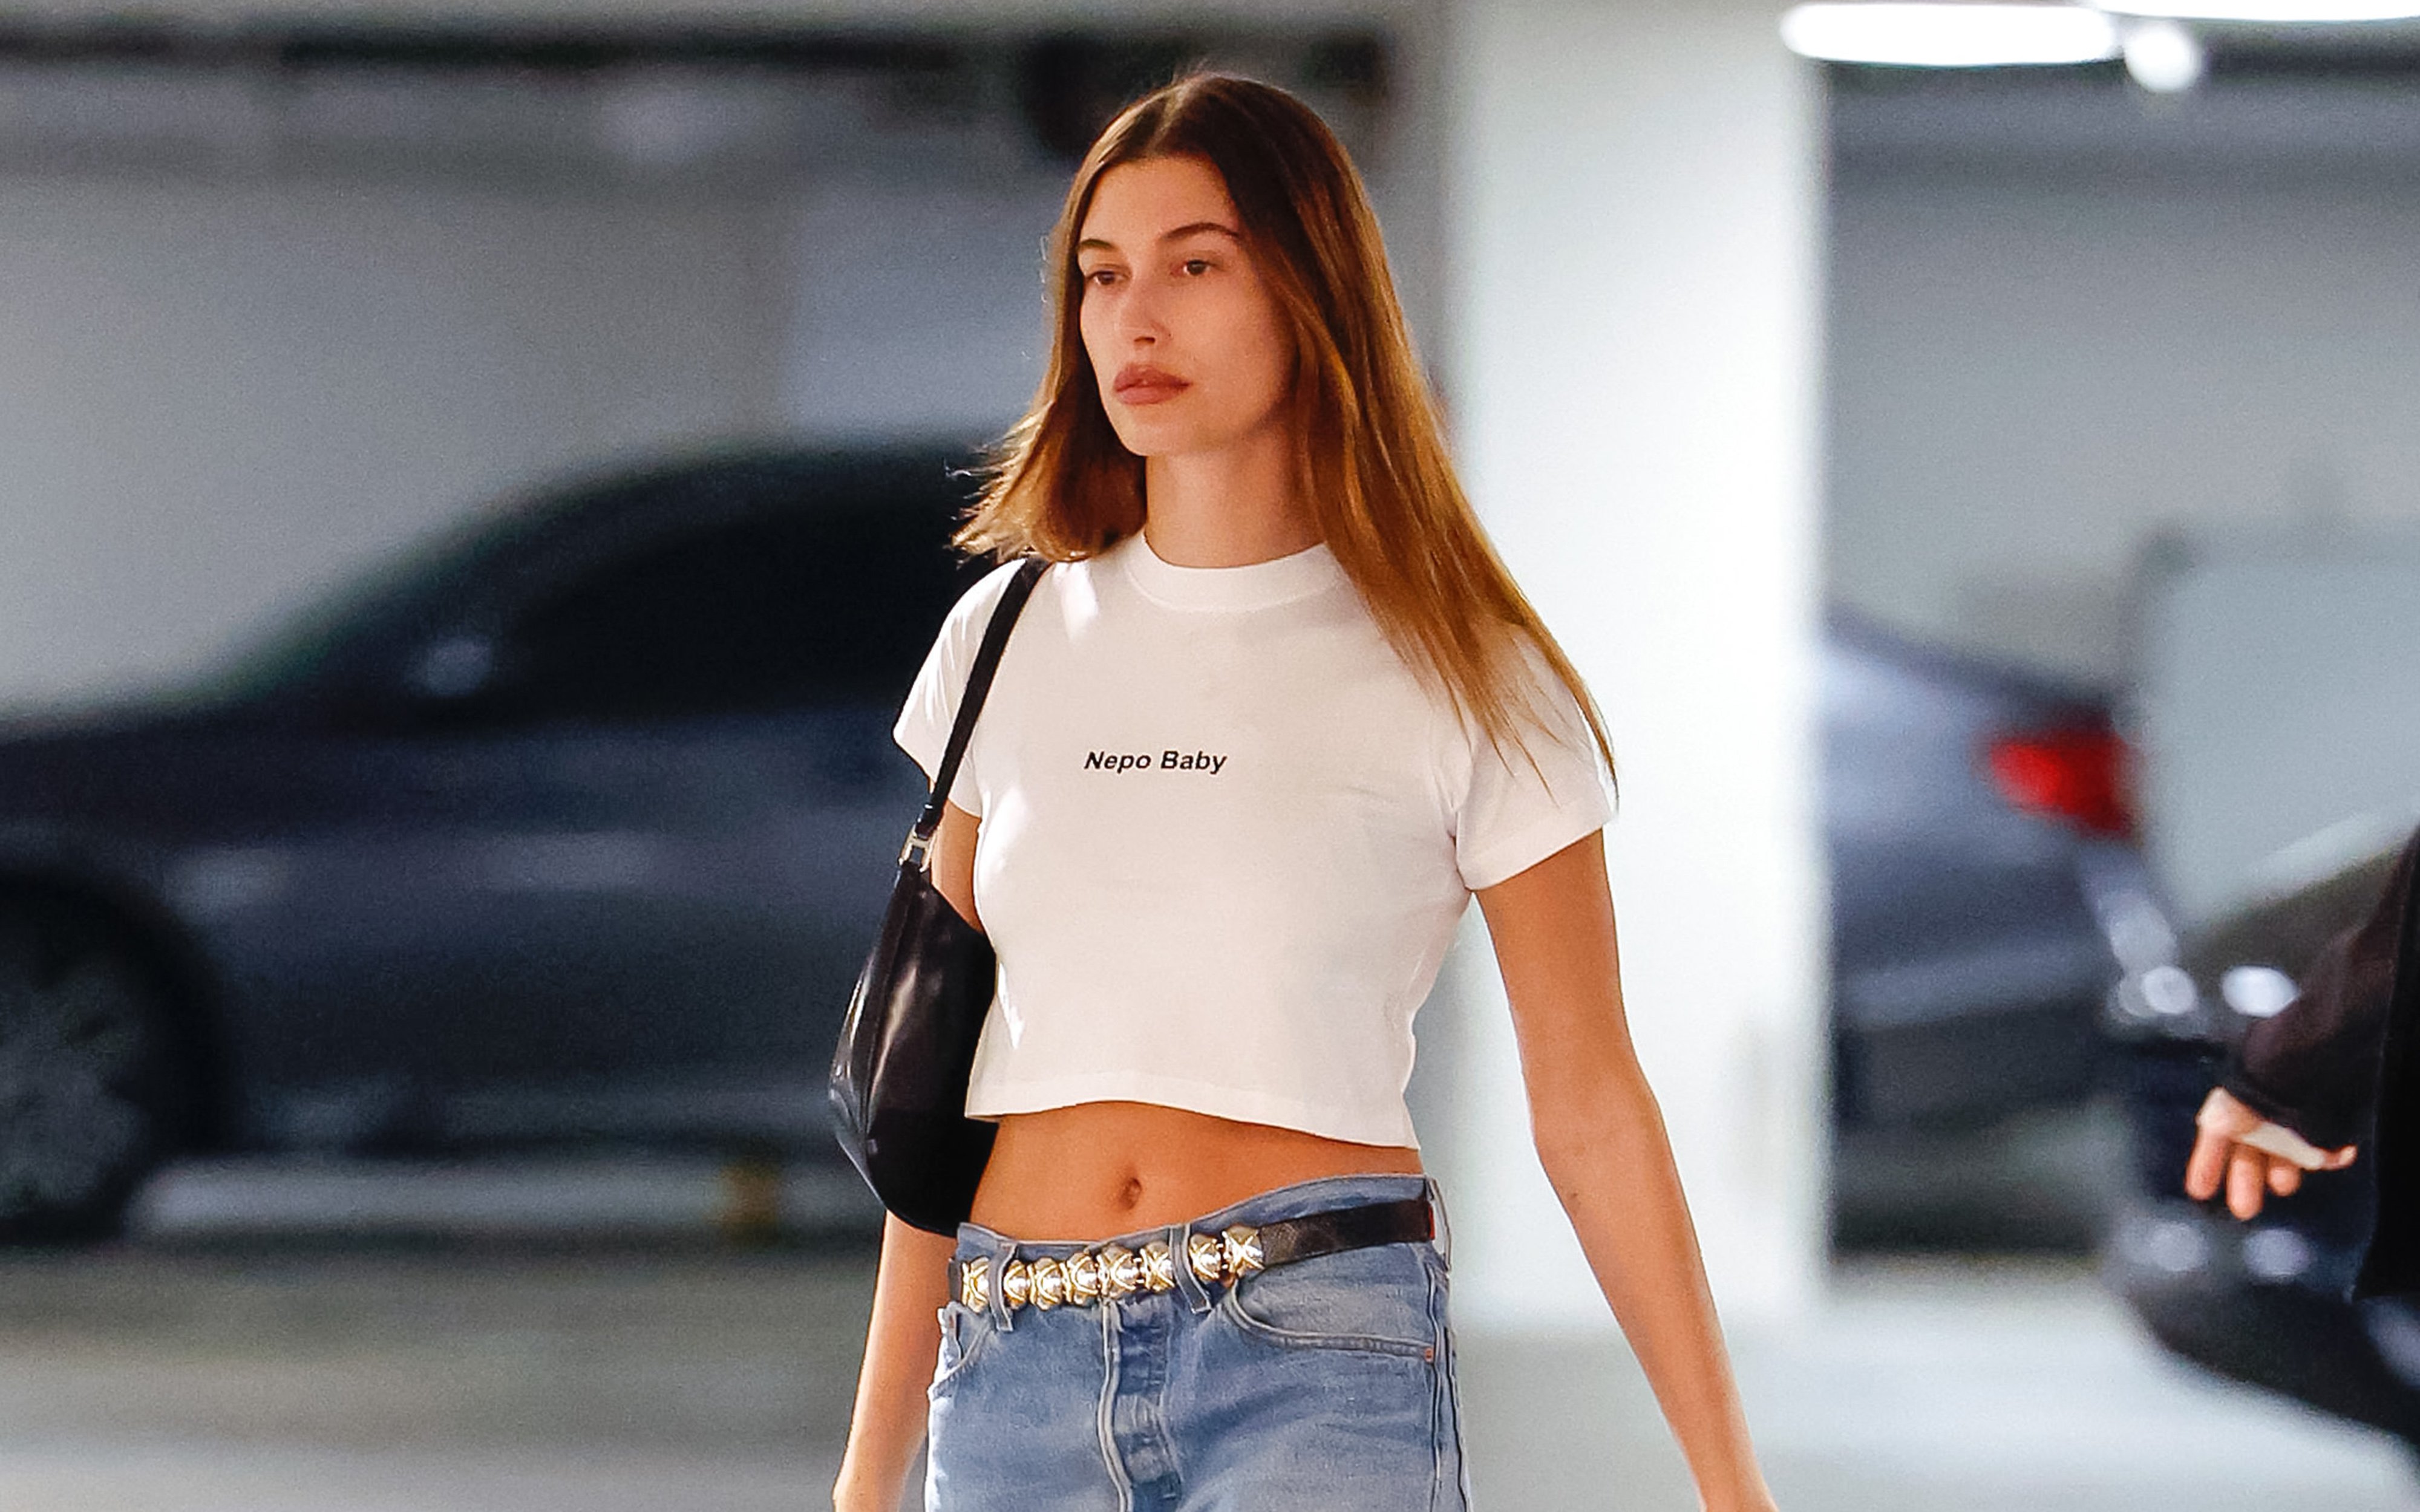 Hailey Bieber Wears a Nepo Baby T-Shirt in Los Angeles